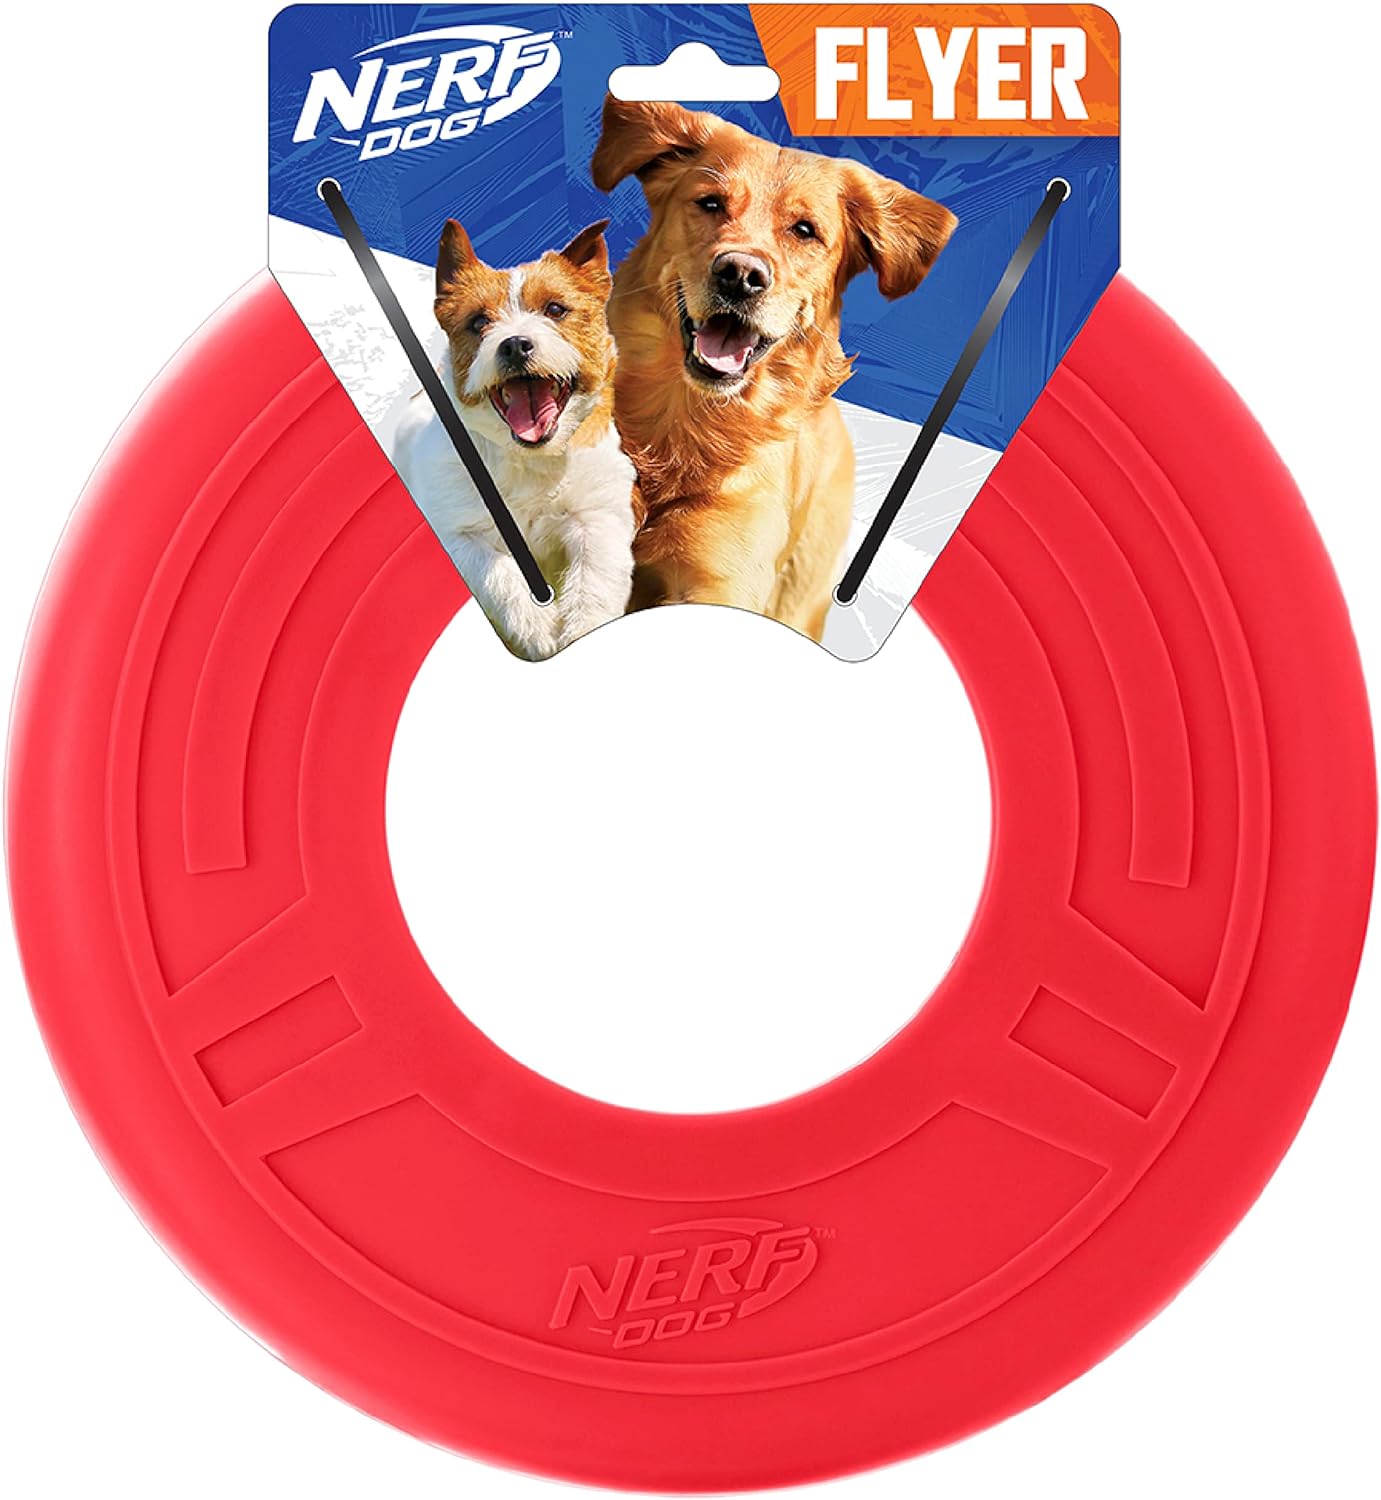 Way better material for your dog to work on catching / retrieving frisbee over a traditional toy frisbee. It' not 